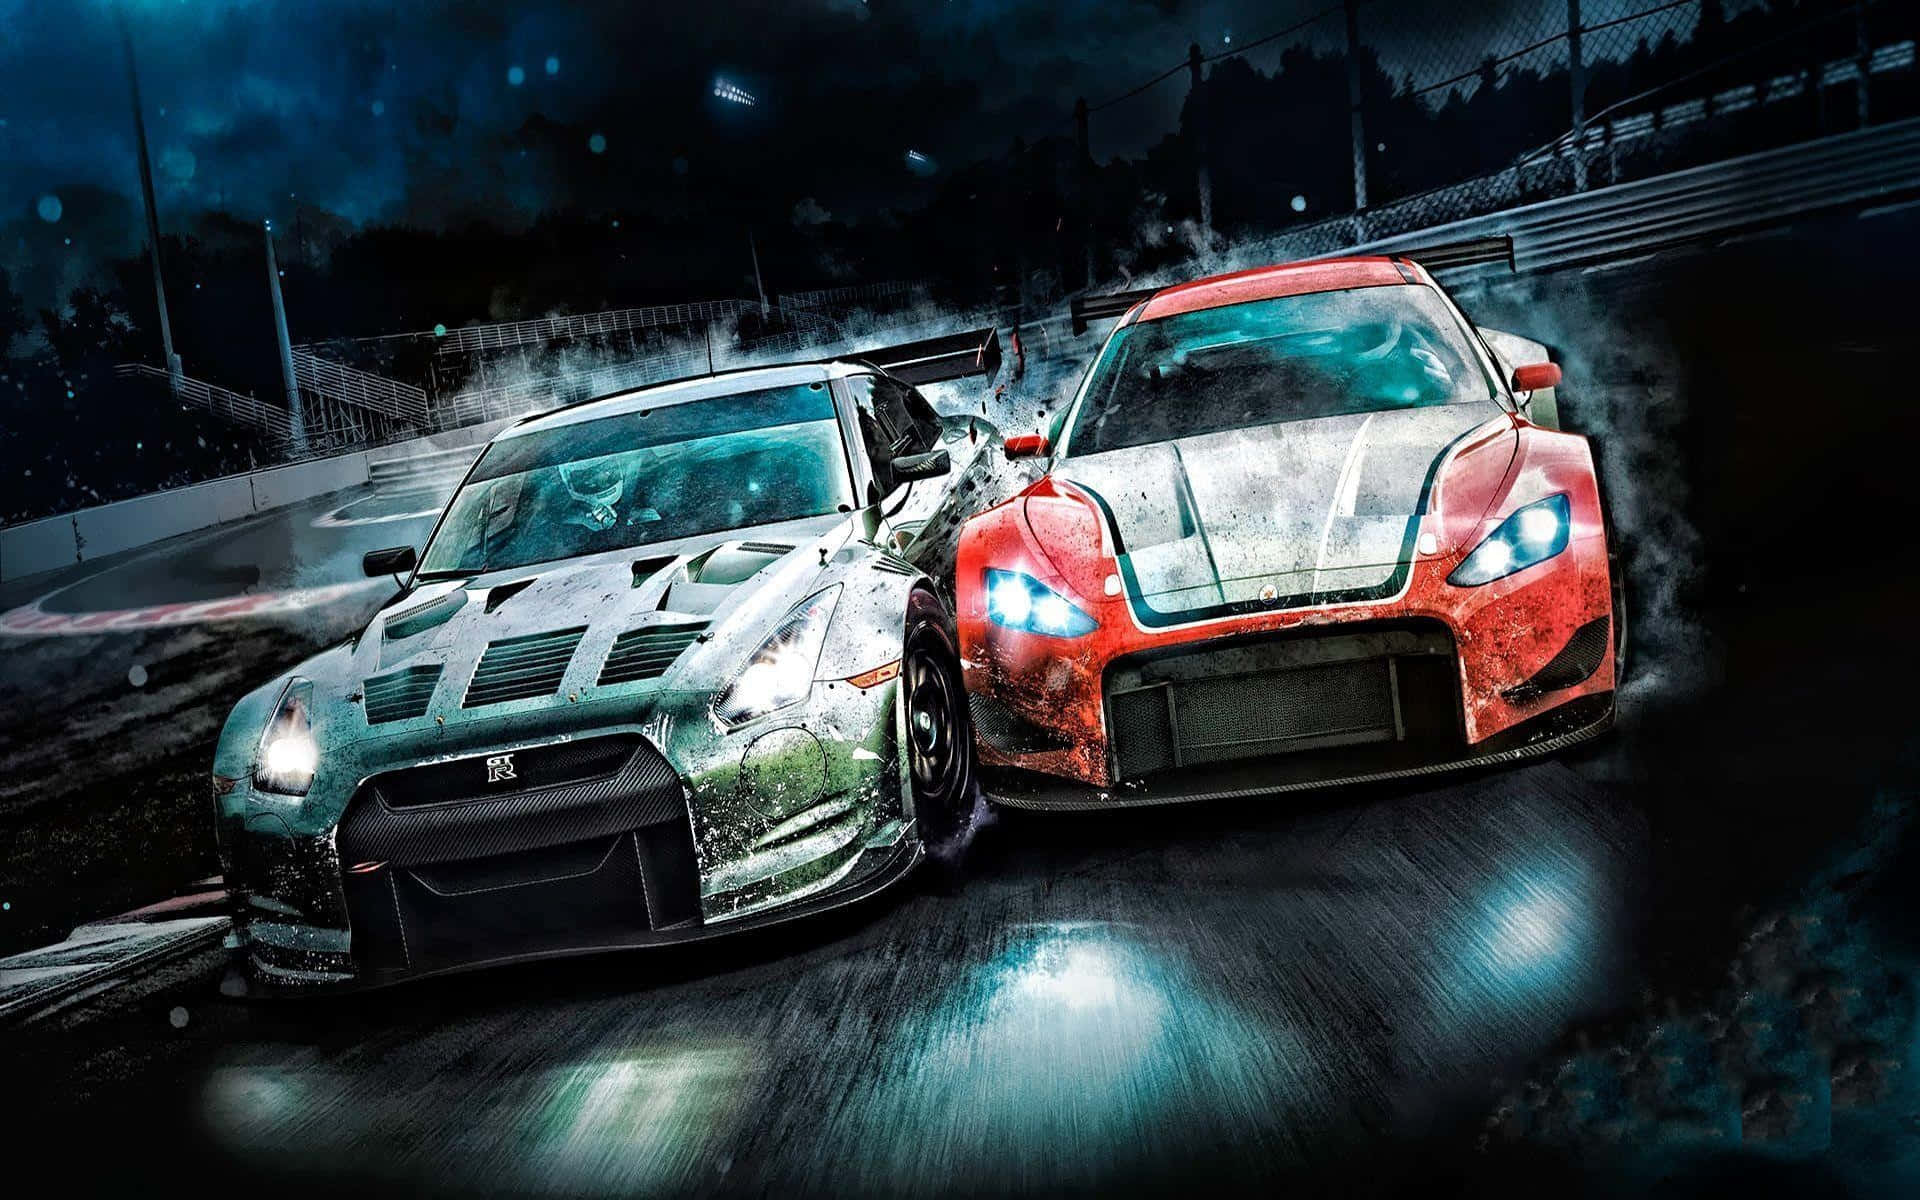 Get your engines ready to race! Wallpaper